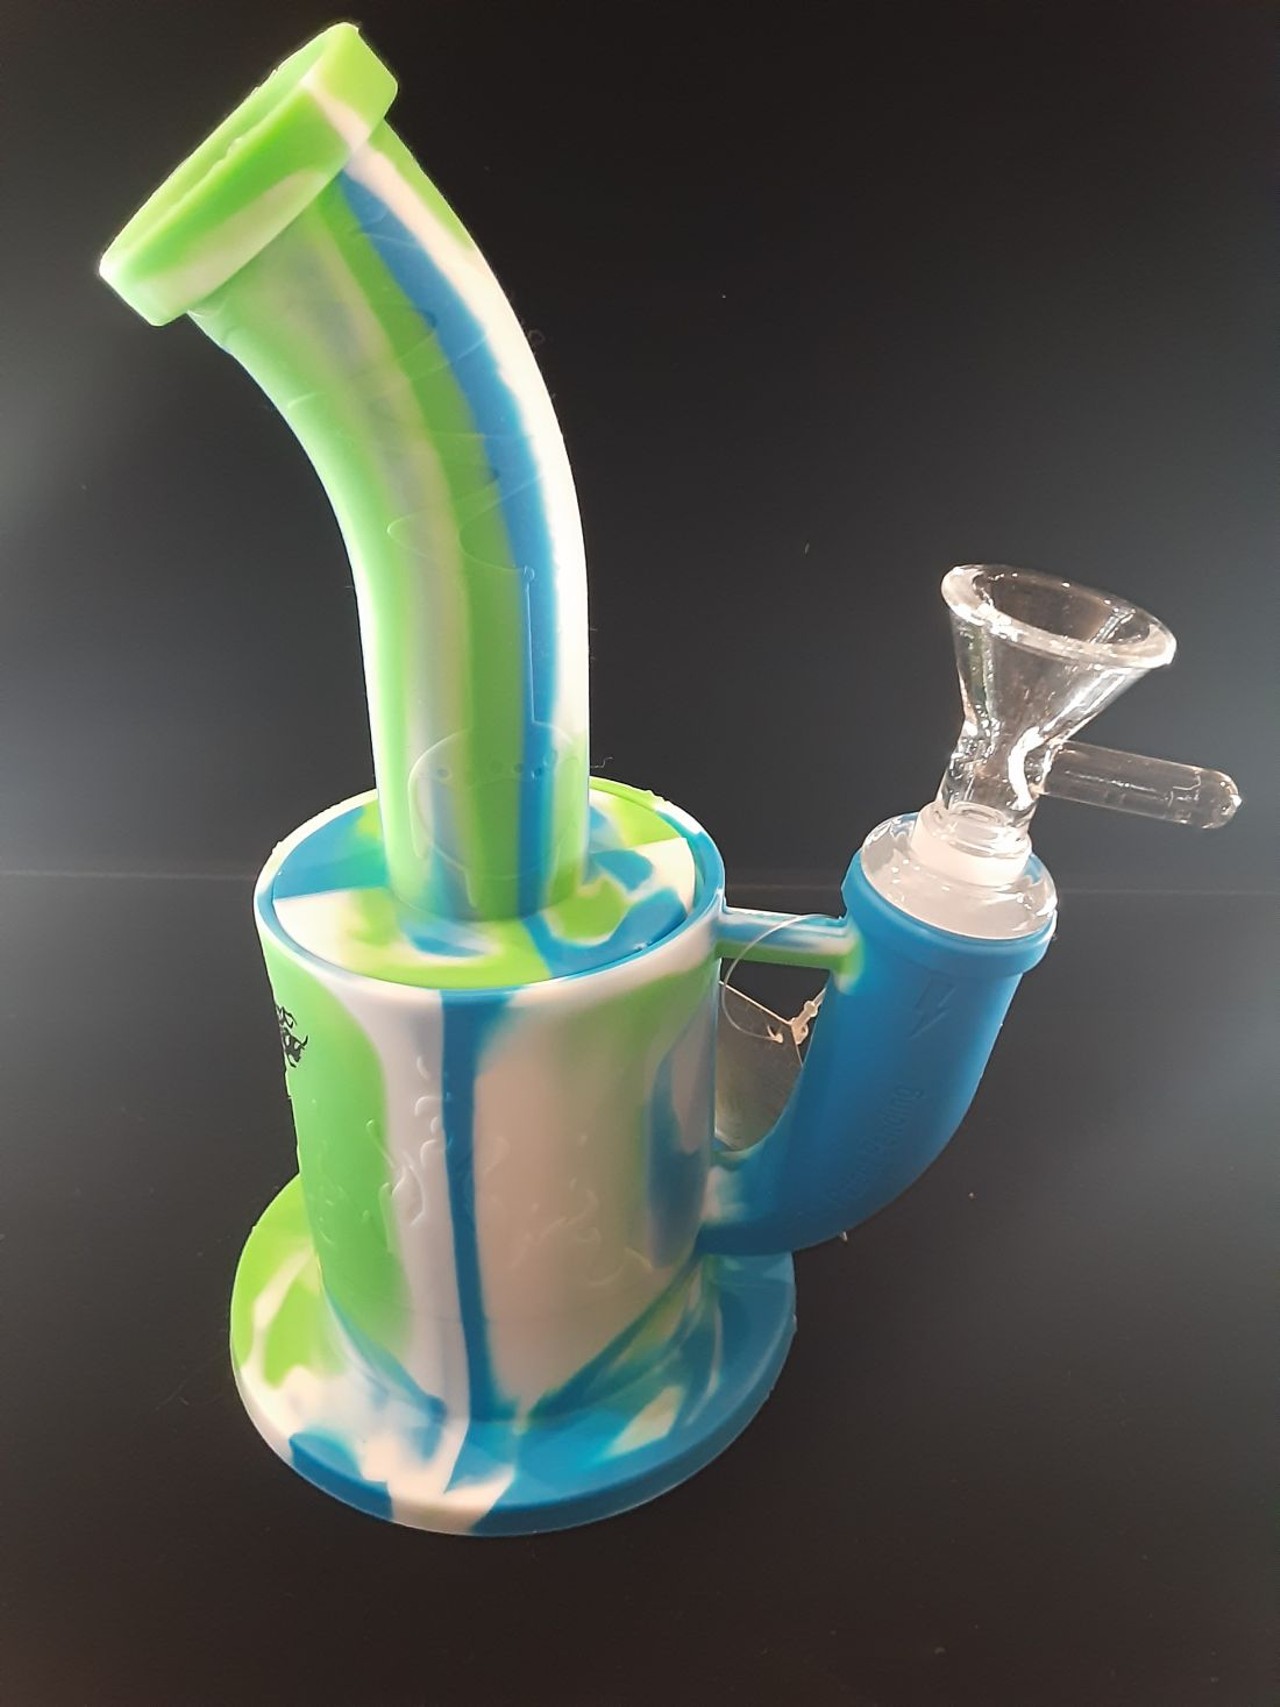 Silicone Water Pipes
Available from: Tha Head Shop; 737 E. Nine Mile Rd., Ferndale; 248-677-0178; thaheadshop.com
Affordable, unbreakable, and available in a variety of bright colors, silicone water pipes are becoming more and more sought after. Perfect for travelling and pet owners! $34.99.
Photo courtesy of Tha Head Shop